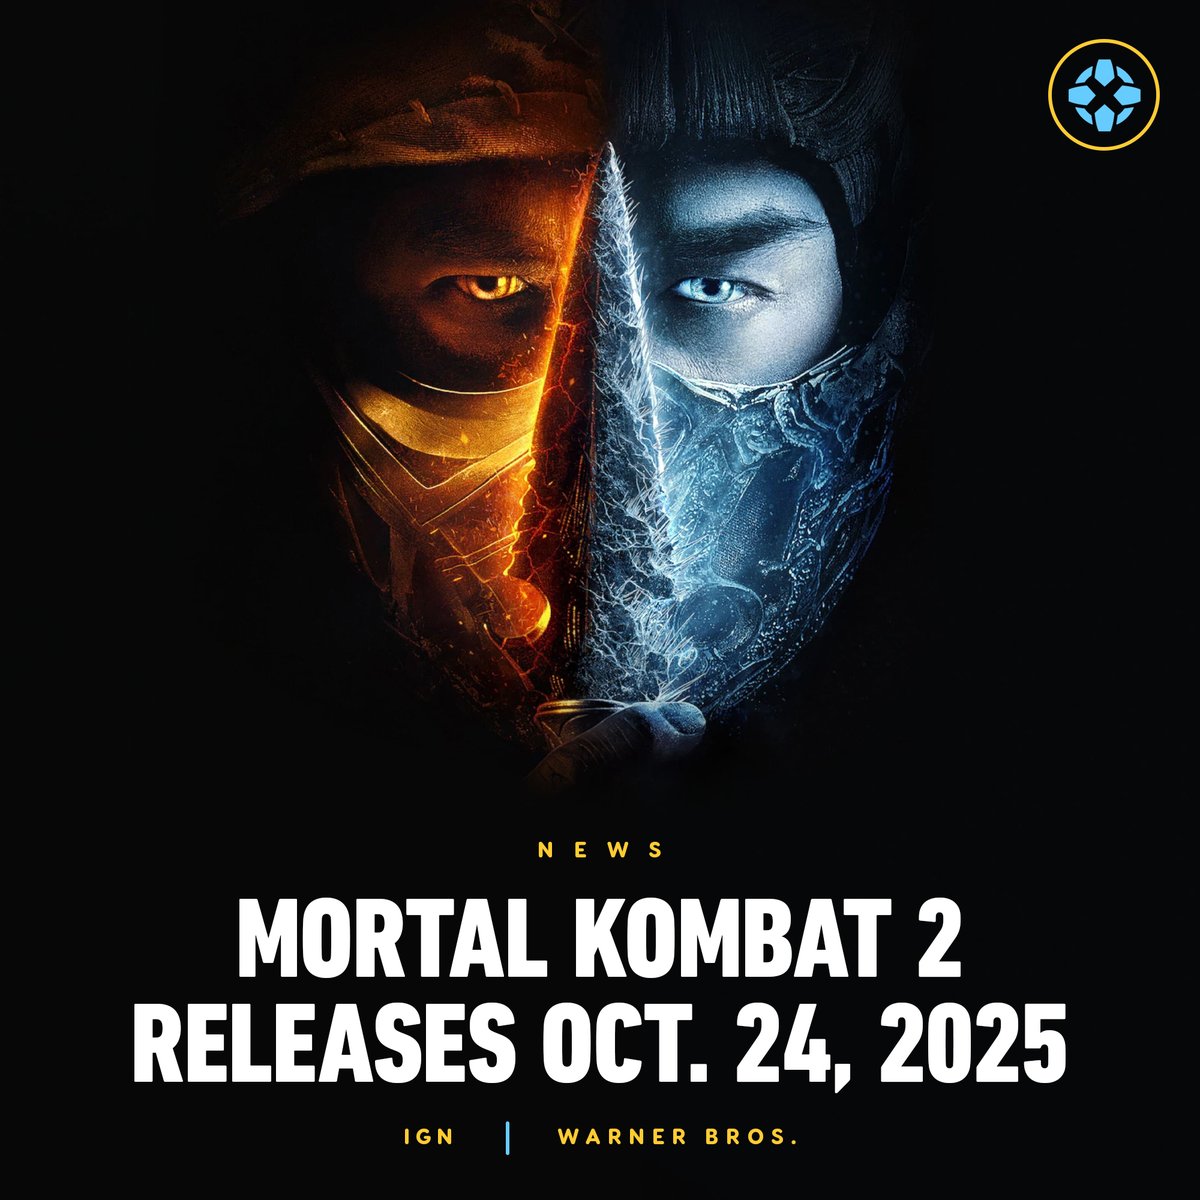 GET OVER HERE! 🔥 

Warner Bros. dates Mortal Kombat 2 for an IMAX release on Oct. 24, 2025.